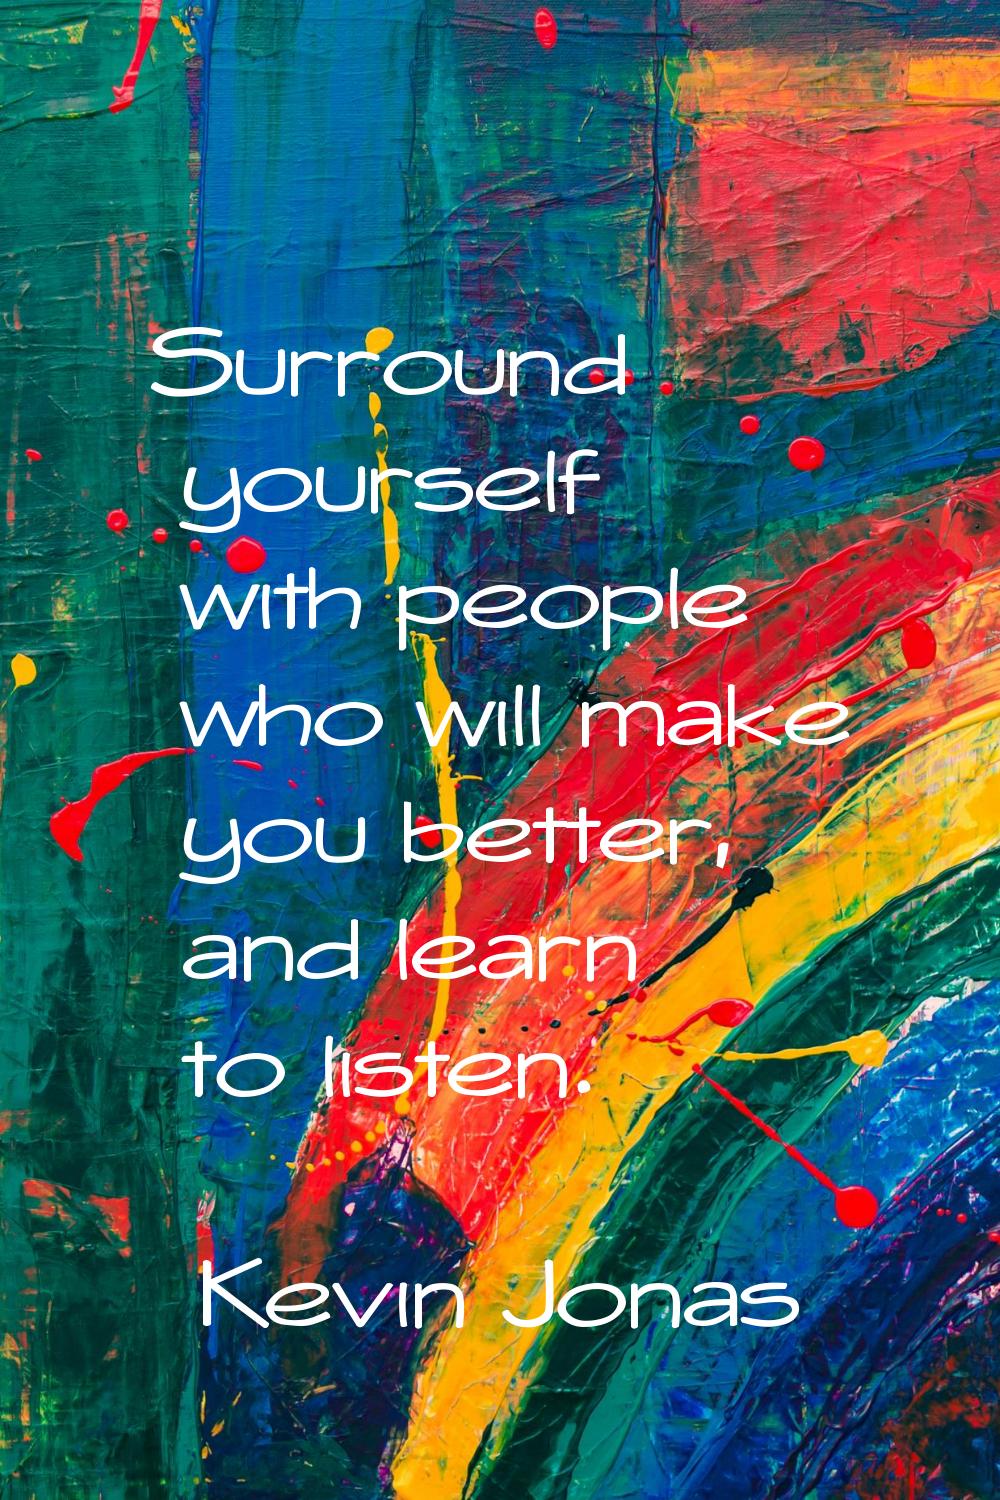 Surround yourself with people who will make you better, and learn to listen.